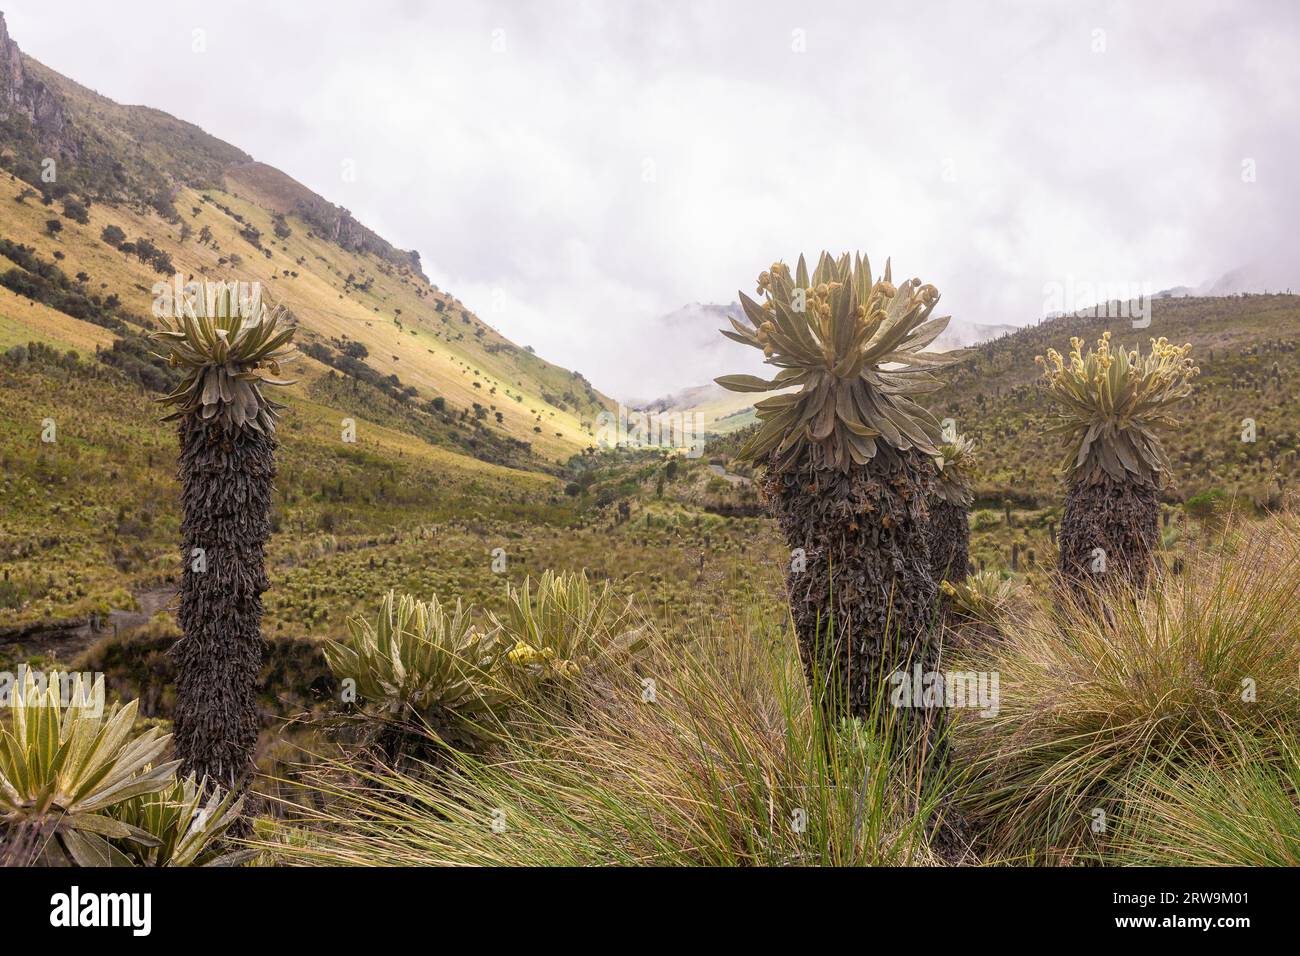 Landscape of the paramo ecosystem in the Andes of Colombia, South America. Stock Photo